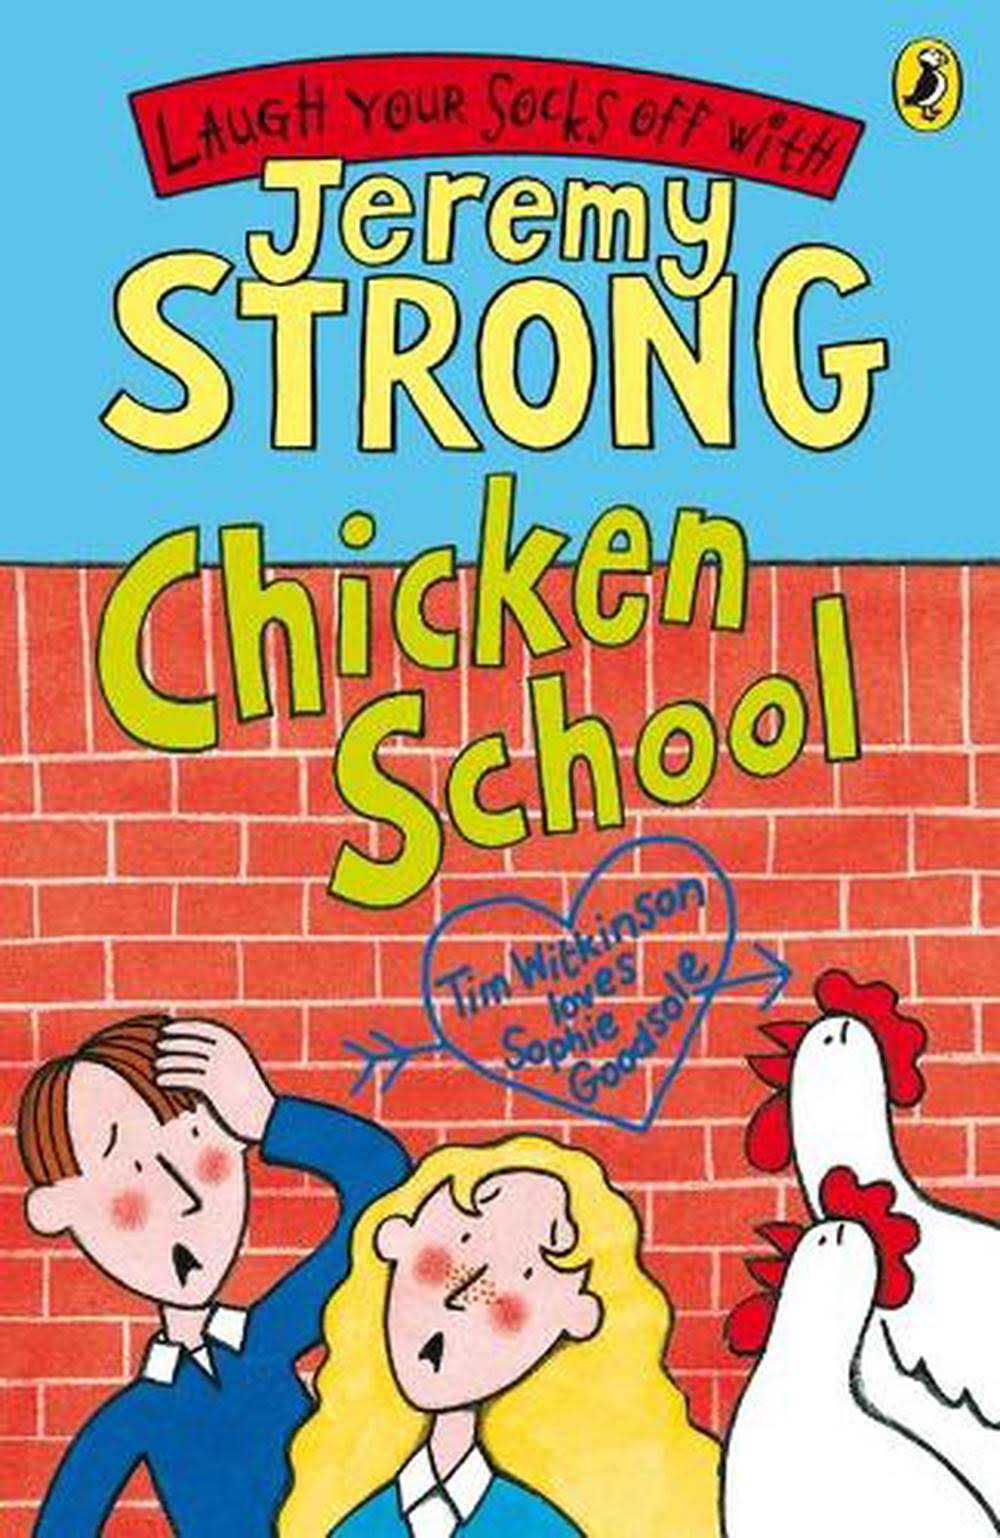 Chicken School by Jeremy Strong